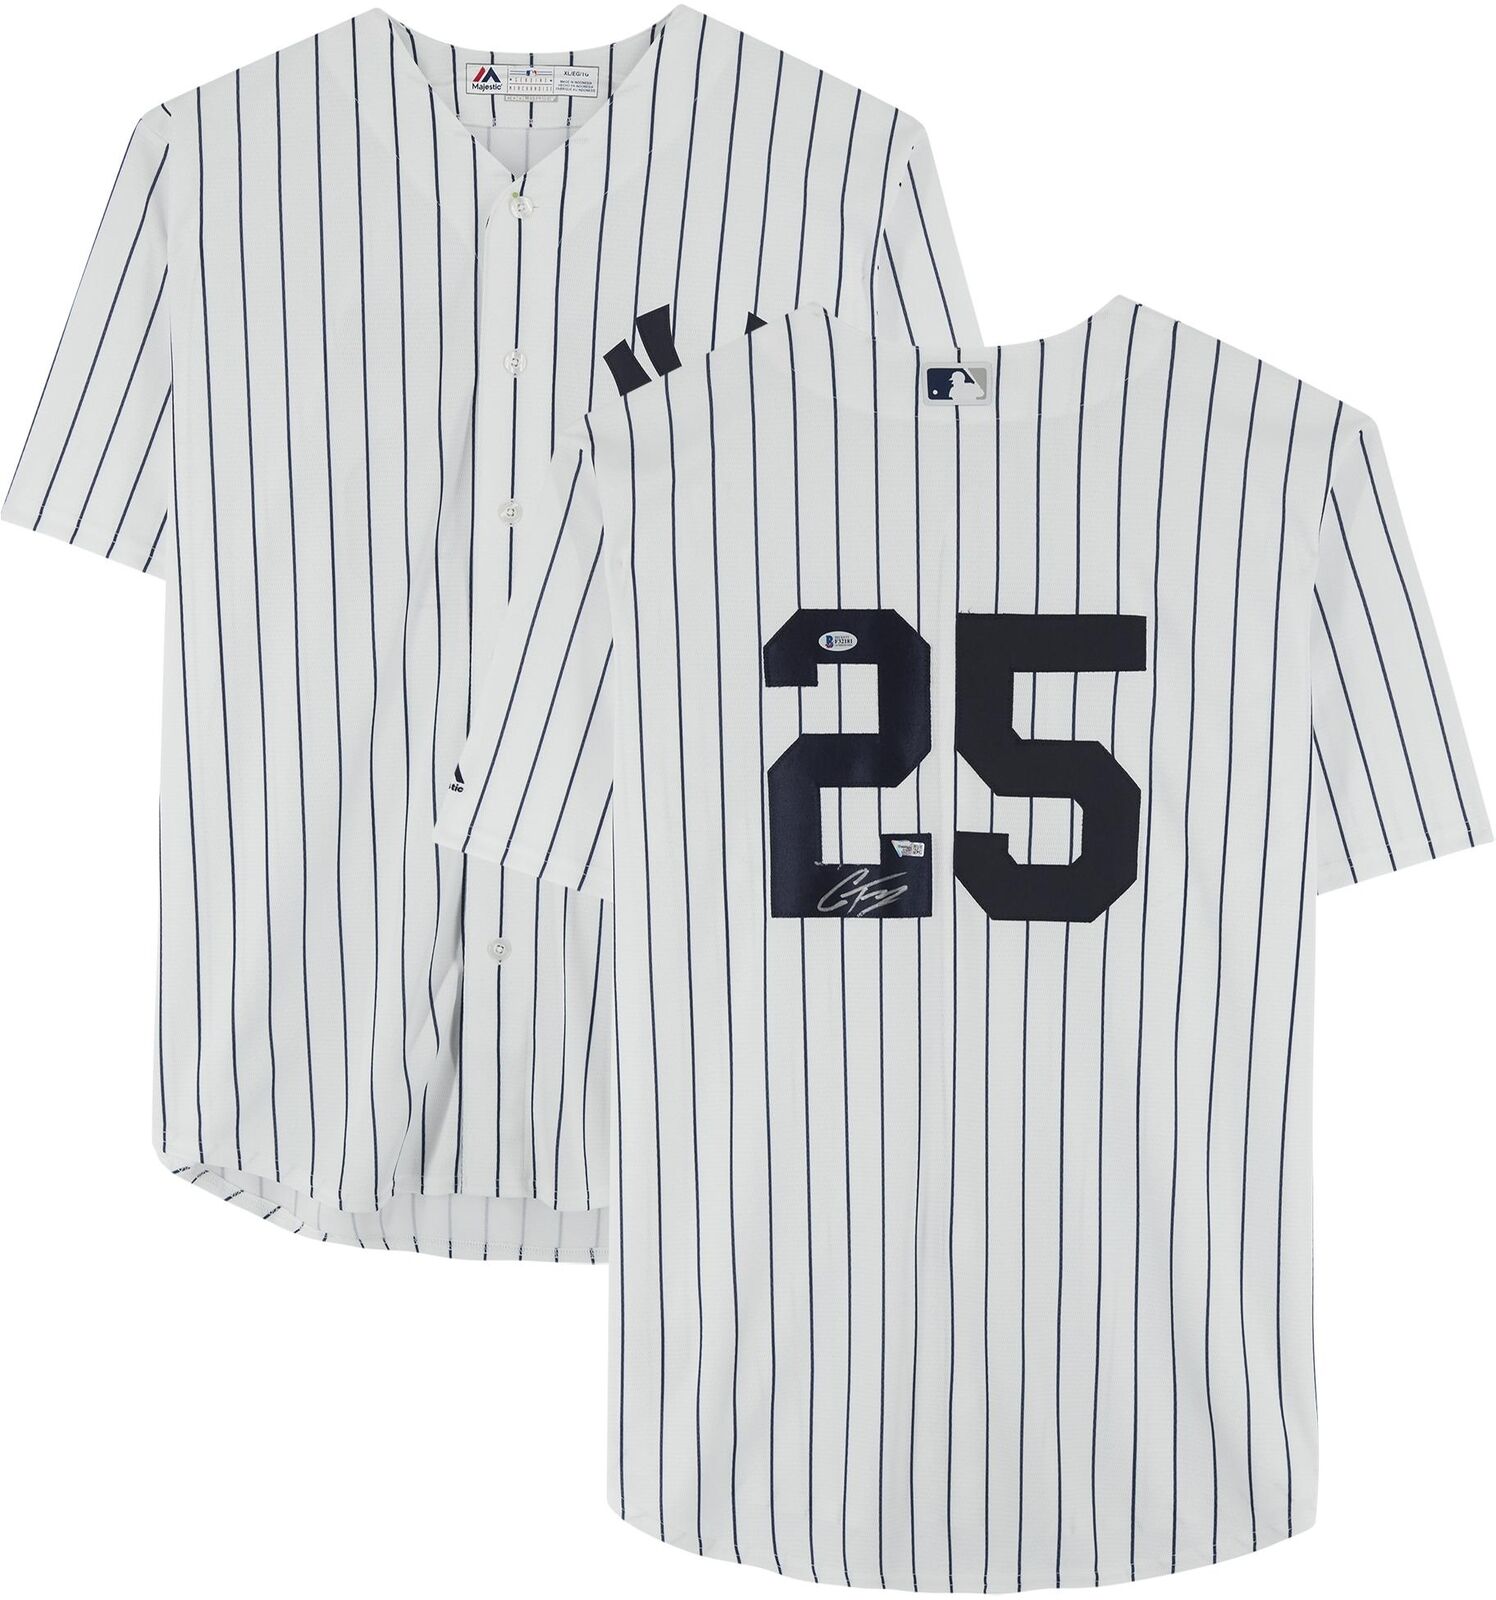 Gleyber Torres Yankees Signed White Majestic Replica Jersey -Topps rated